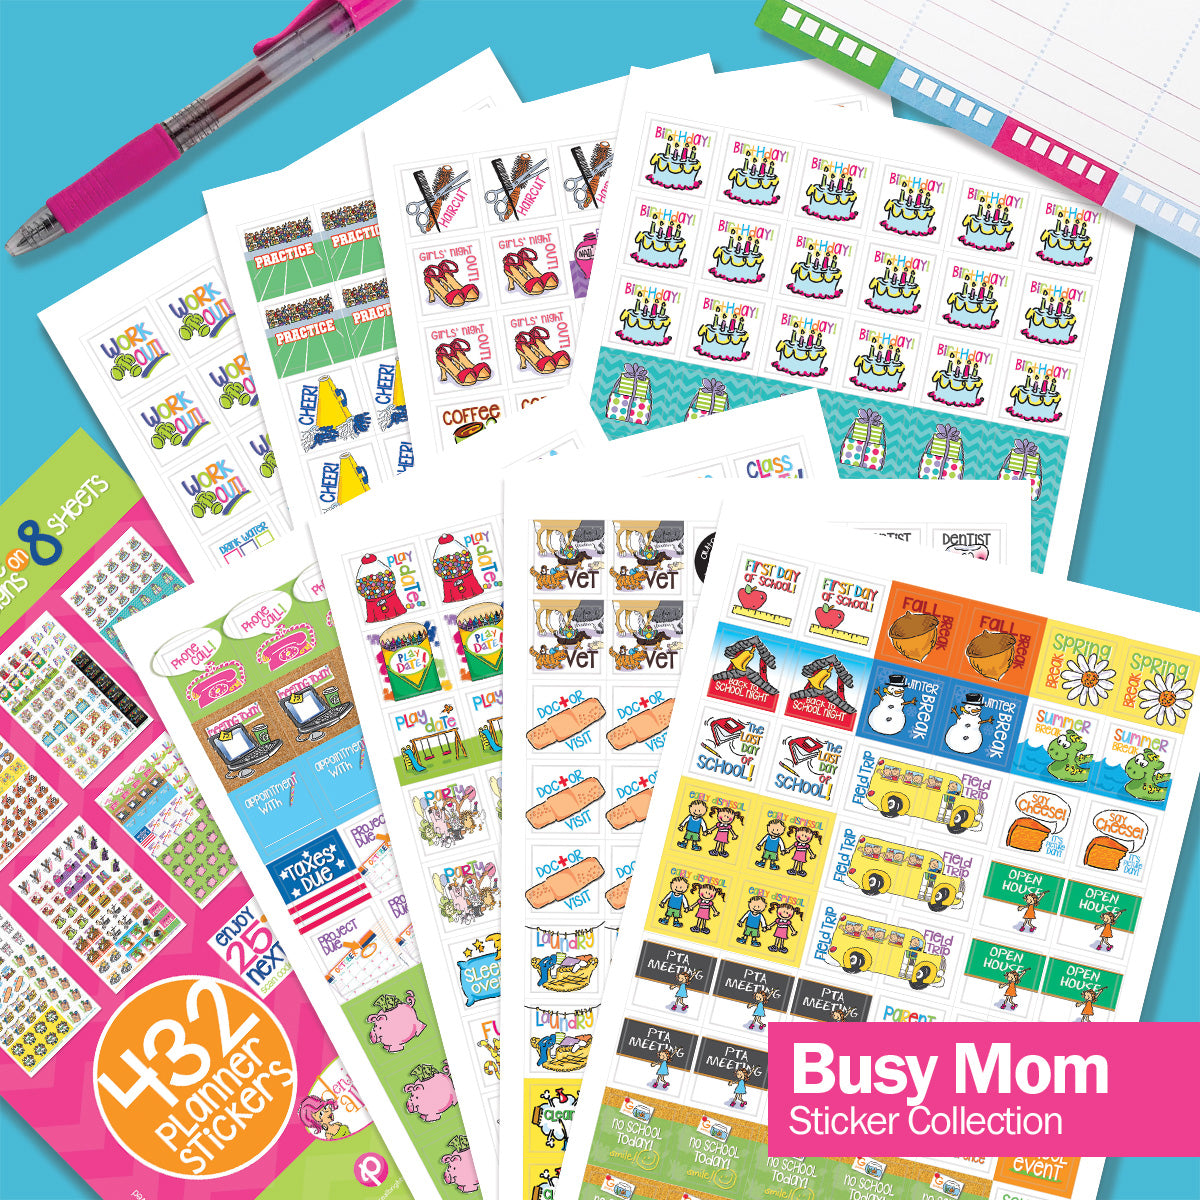 Best Planner Stickers | Family, Work, To-Dos, Events, Goals | 8 Styles Busy Mom